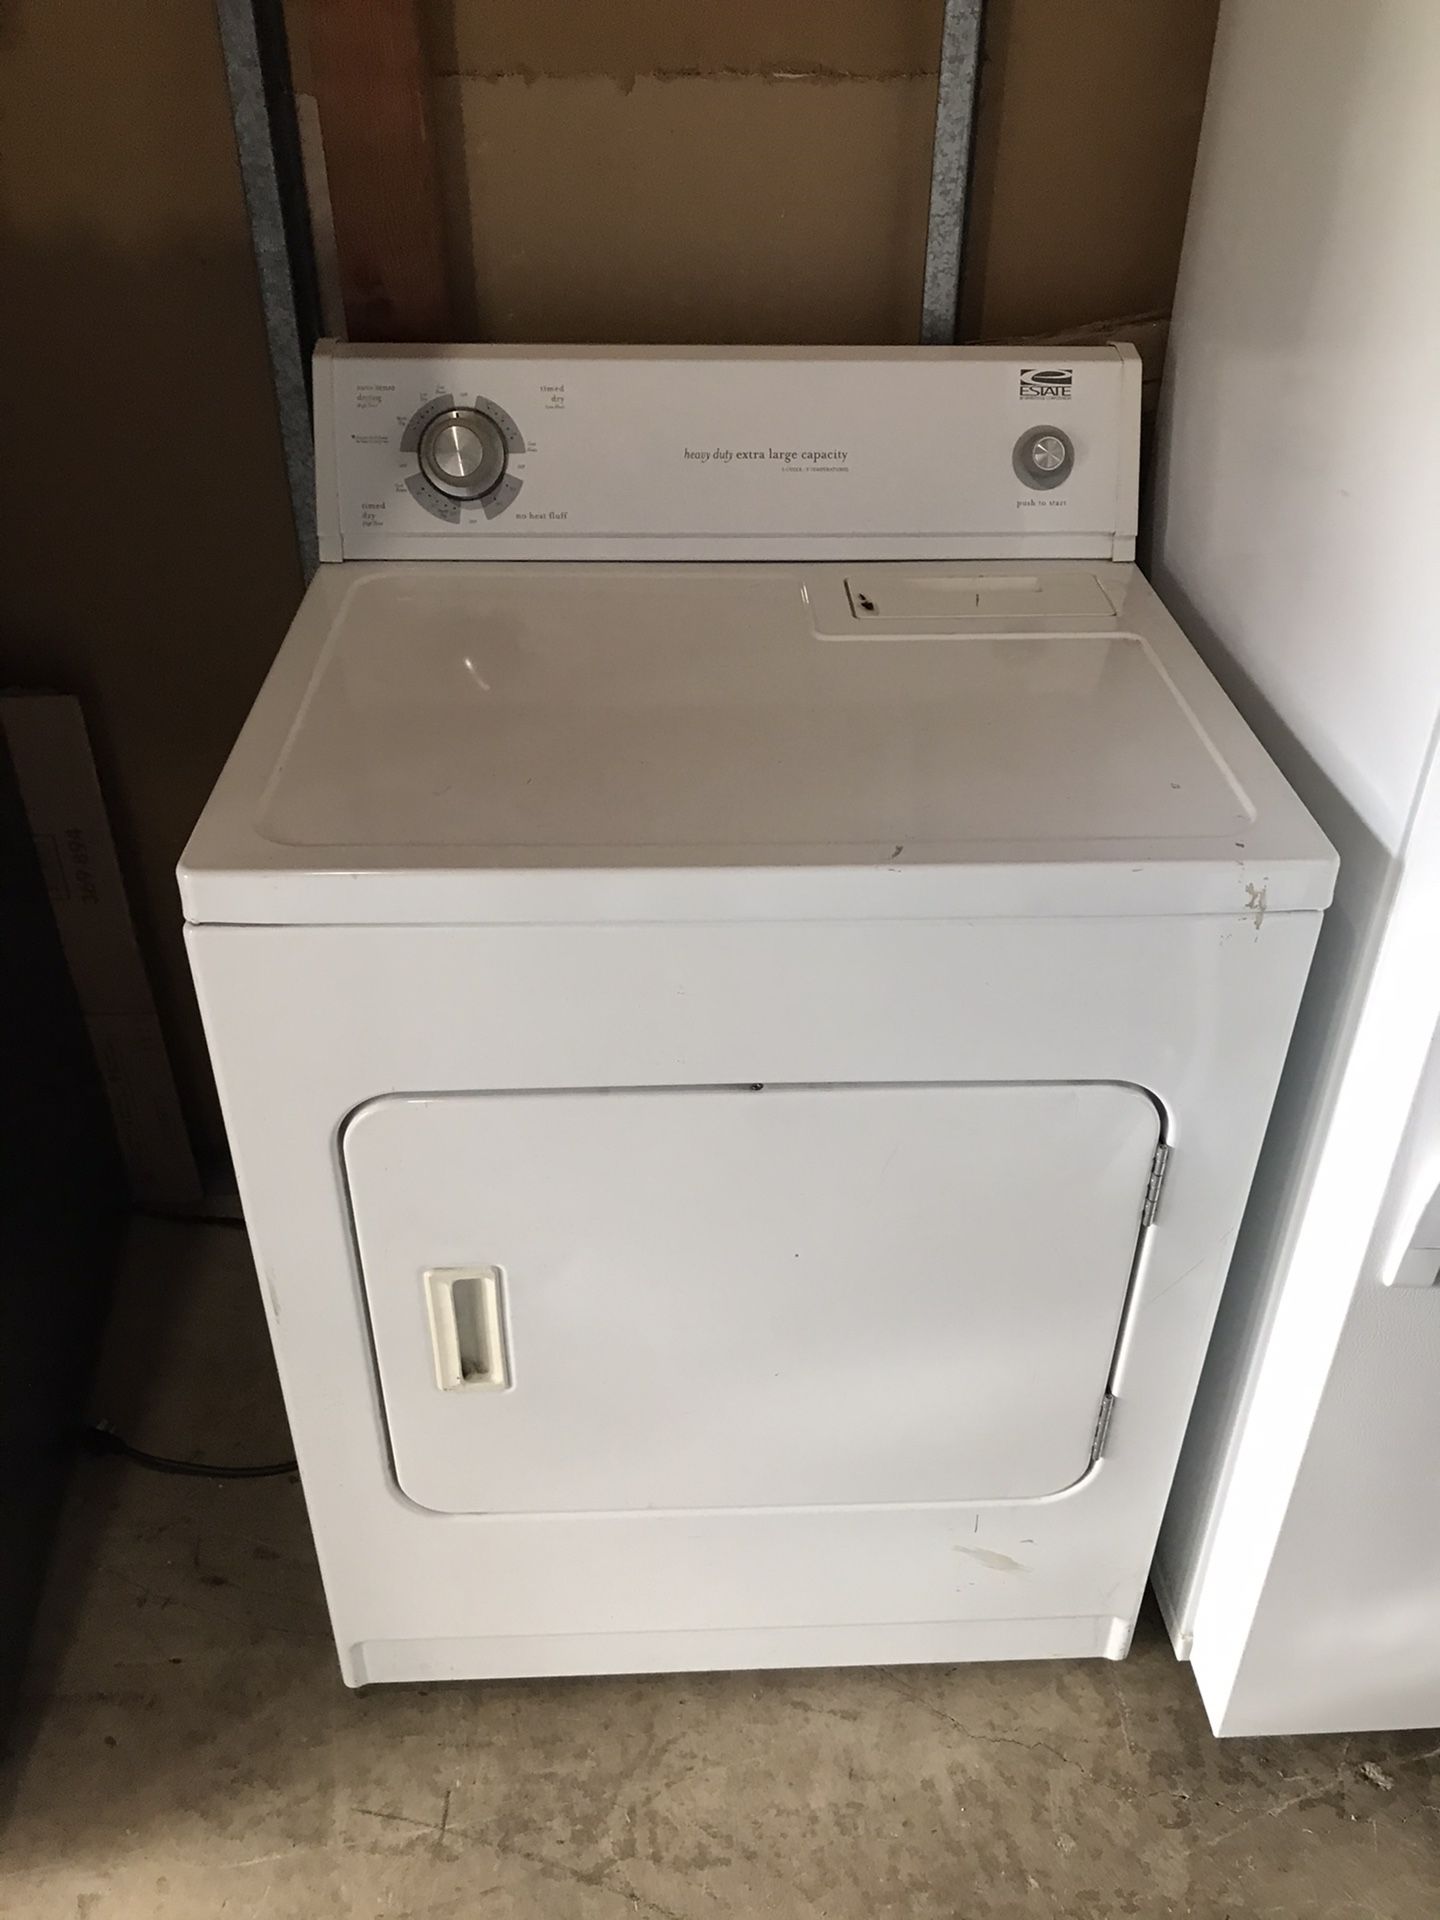 Electric dryer by whirlpool